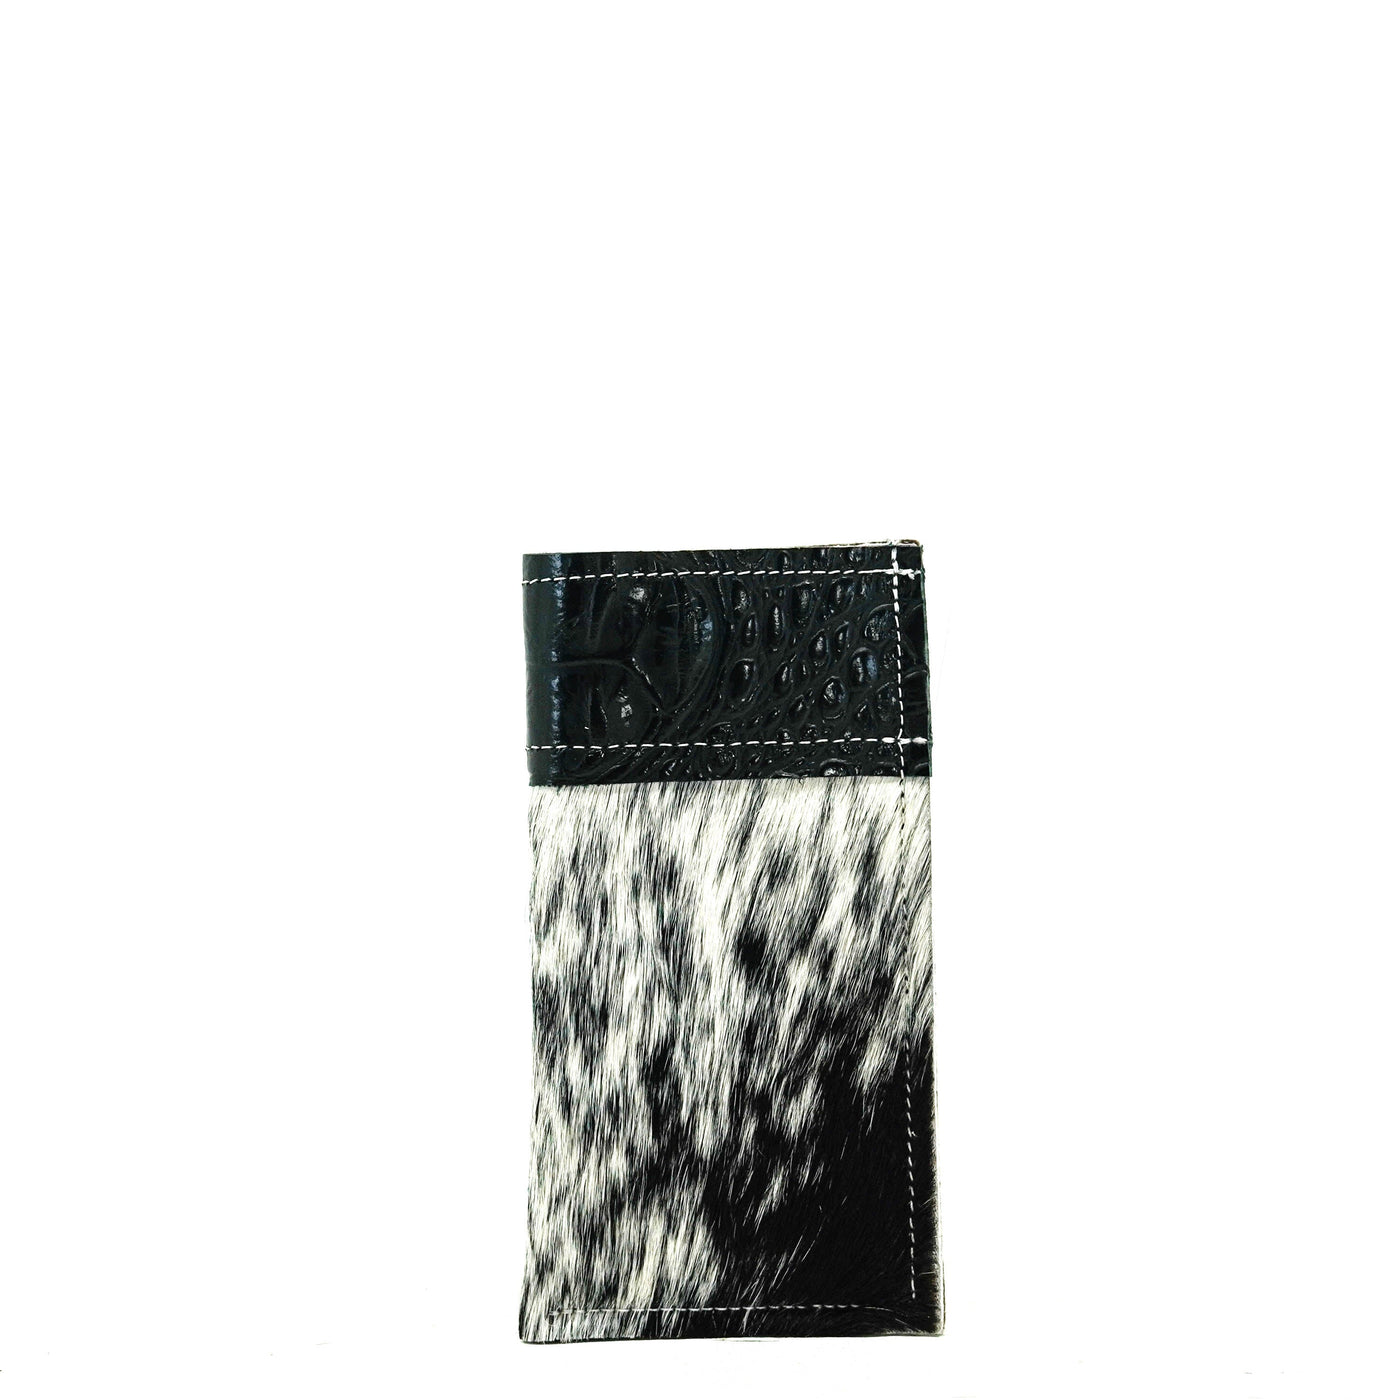 Sunglass Case - Black & White w/ Onyx Croc-Sunglass Case-Western-Cowhide-Bags-Handmade-Products-Gifts-Dancing Cactus Designs